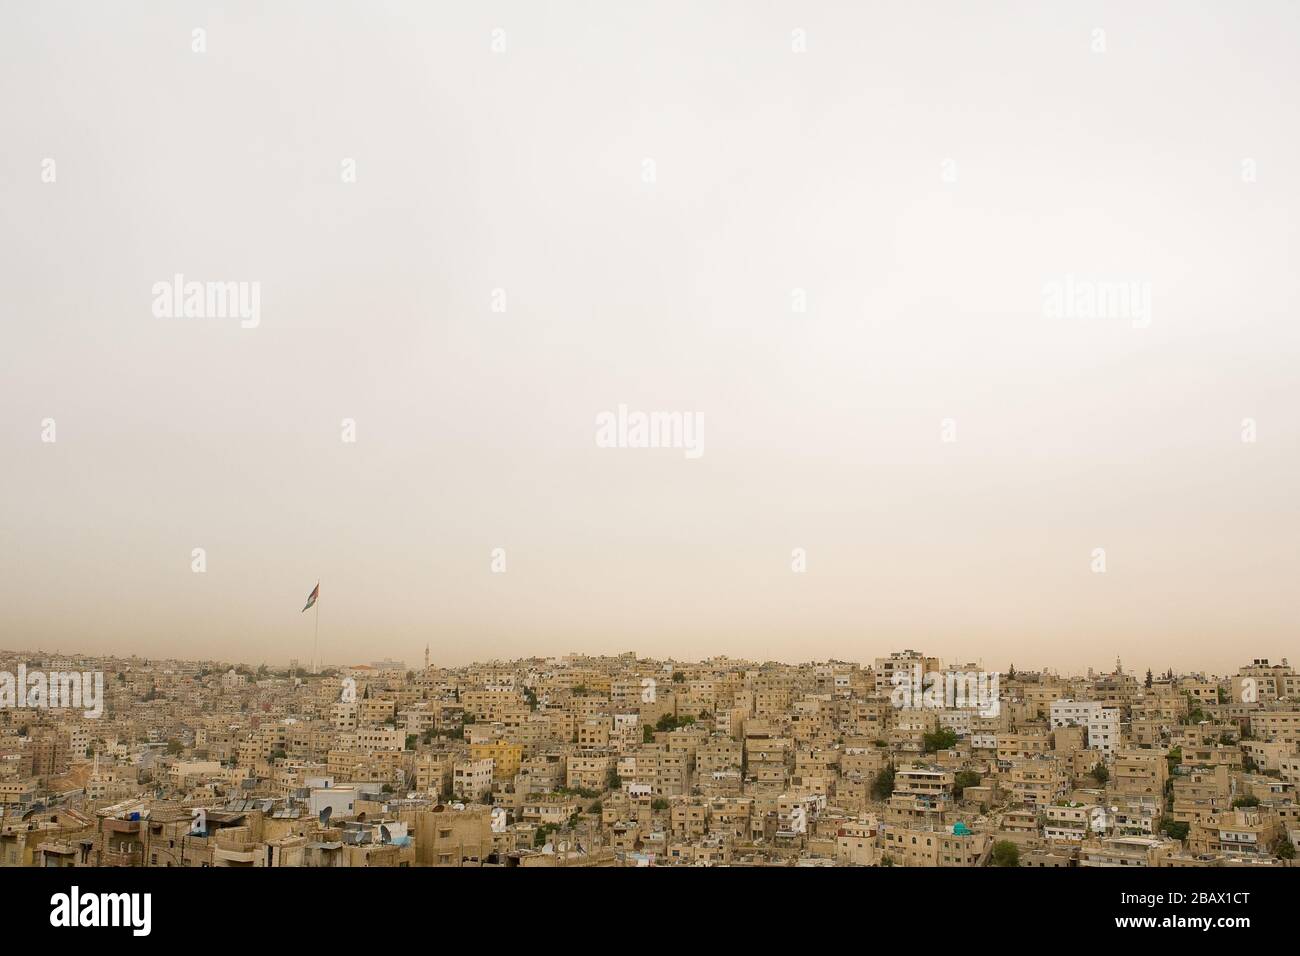 The densely populated area of the old city of Amman, Jordan, and the  Raghadan Flagpole, one of the tallest free-standing flagpoles in the world  Stock Photo - Alamy